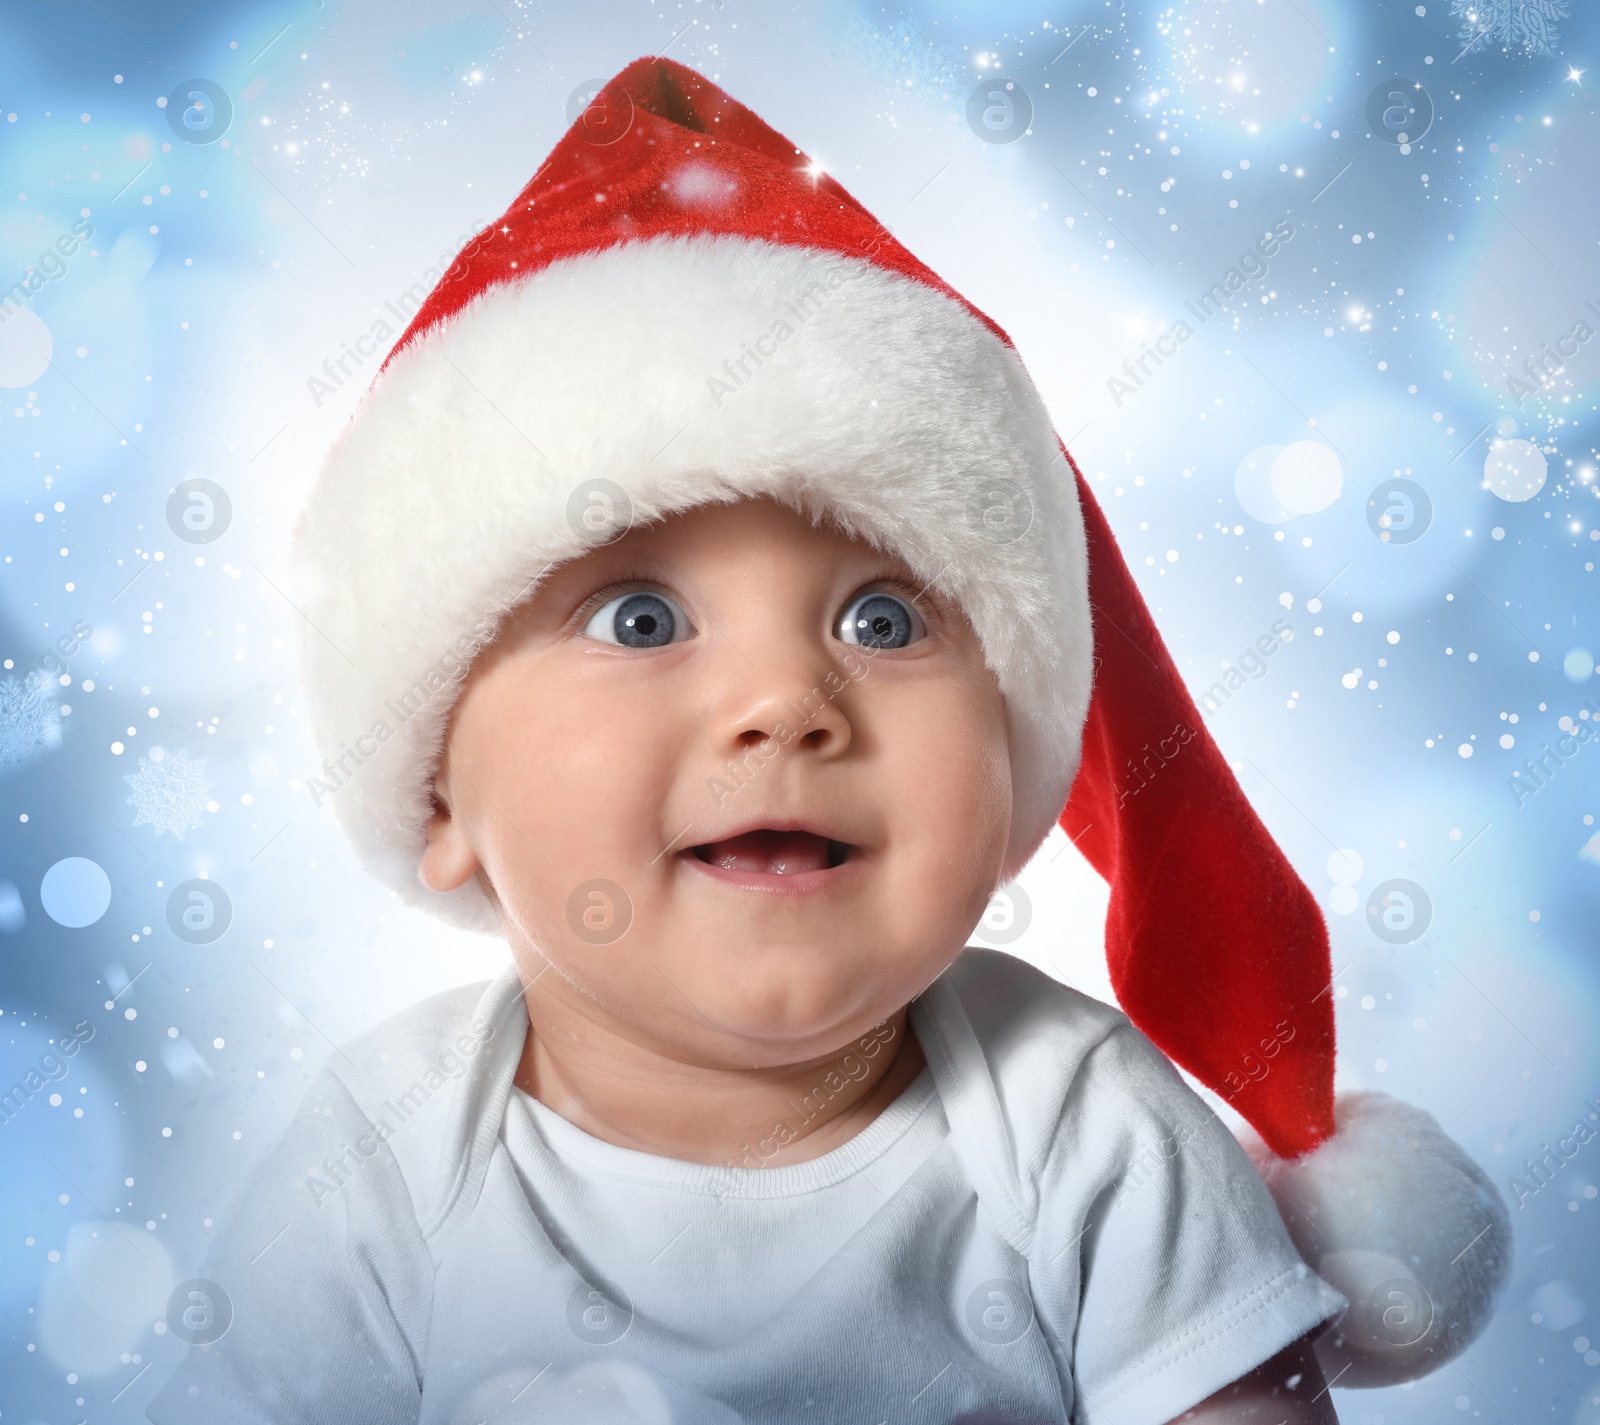 Image of Cute baby in Santa hat against blurred lights. Christmas celebration